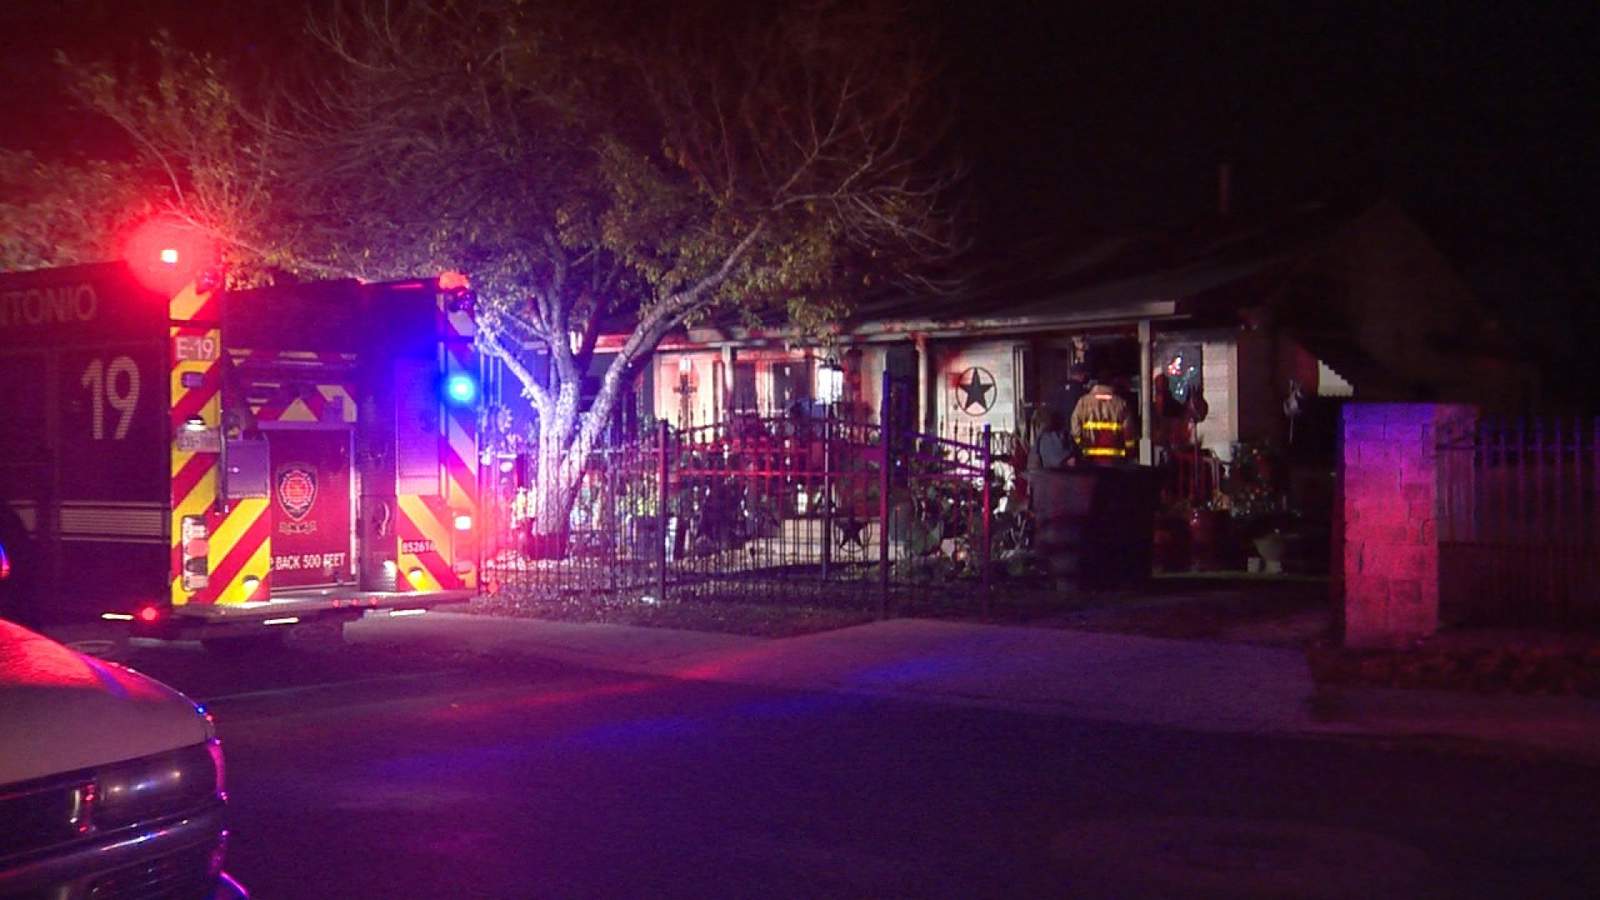 Woman displaced by house fire caused by faulty electrical outlet, fire officials say